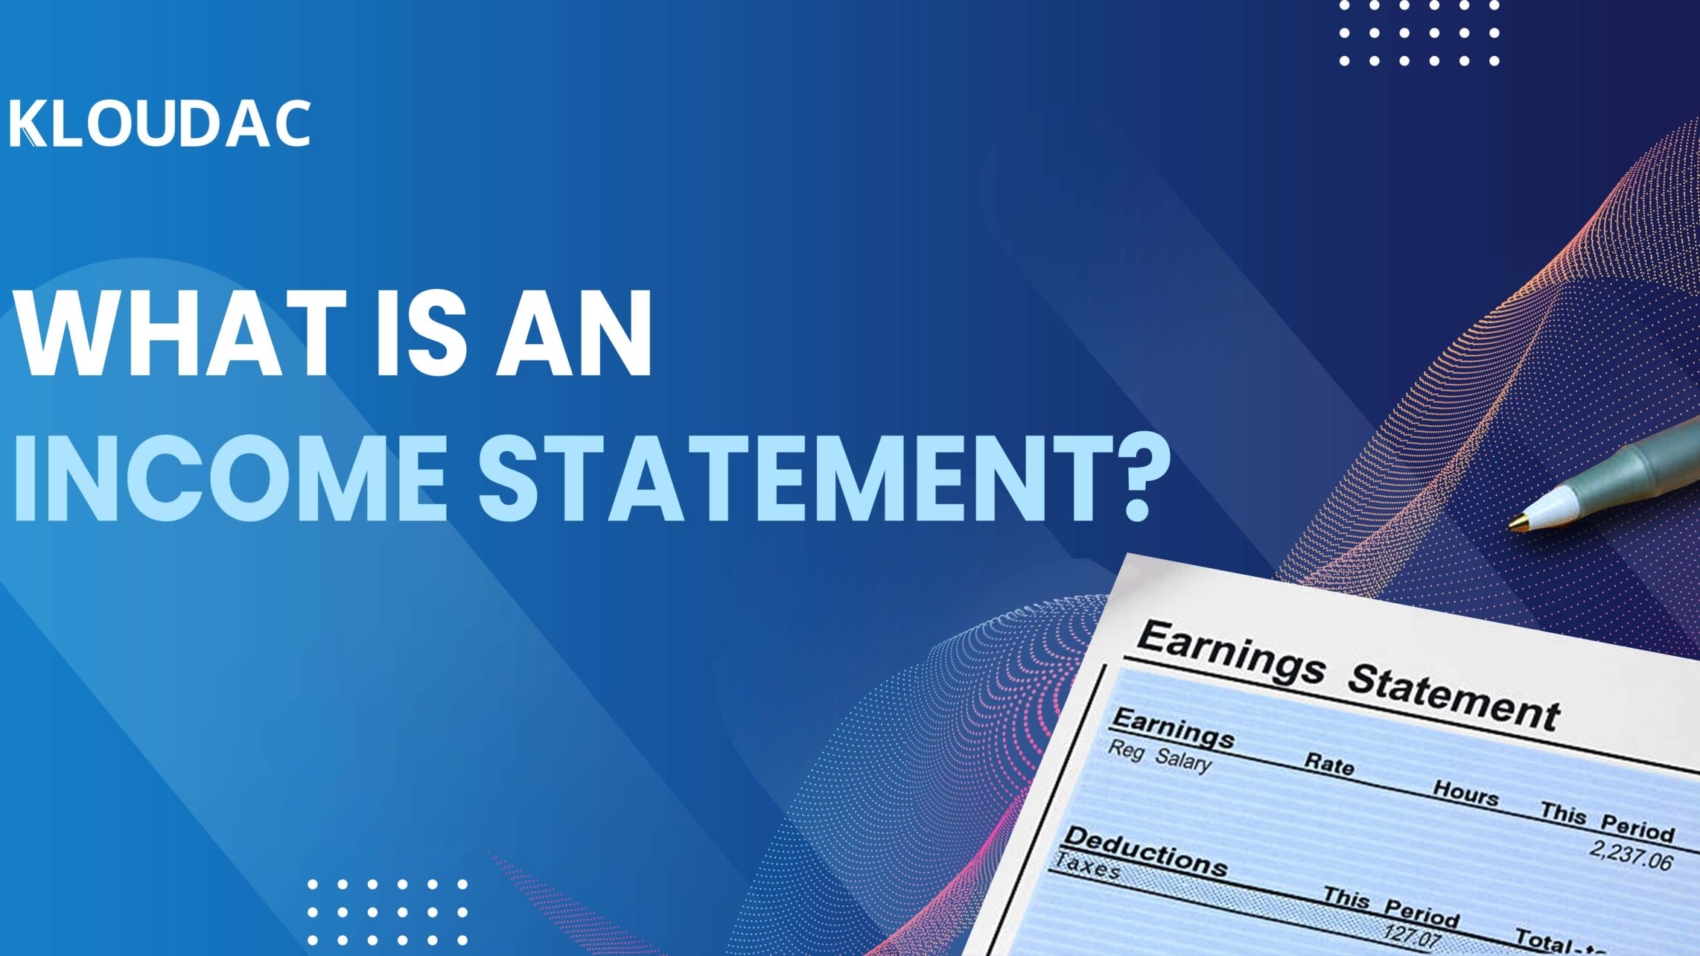 What is an income statement?